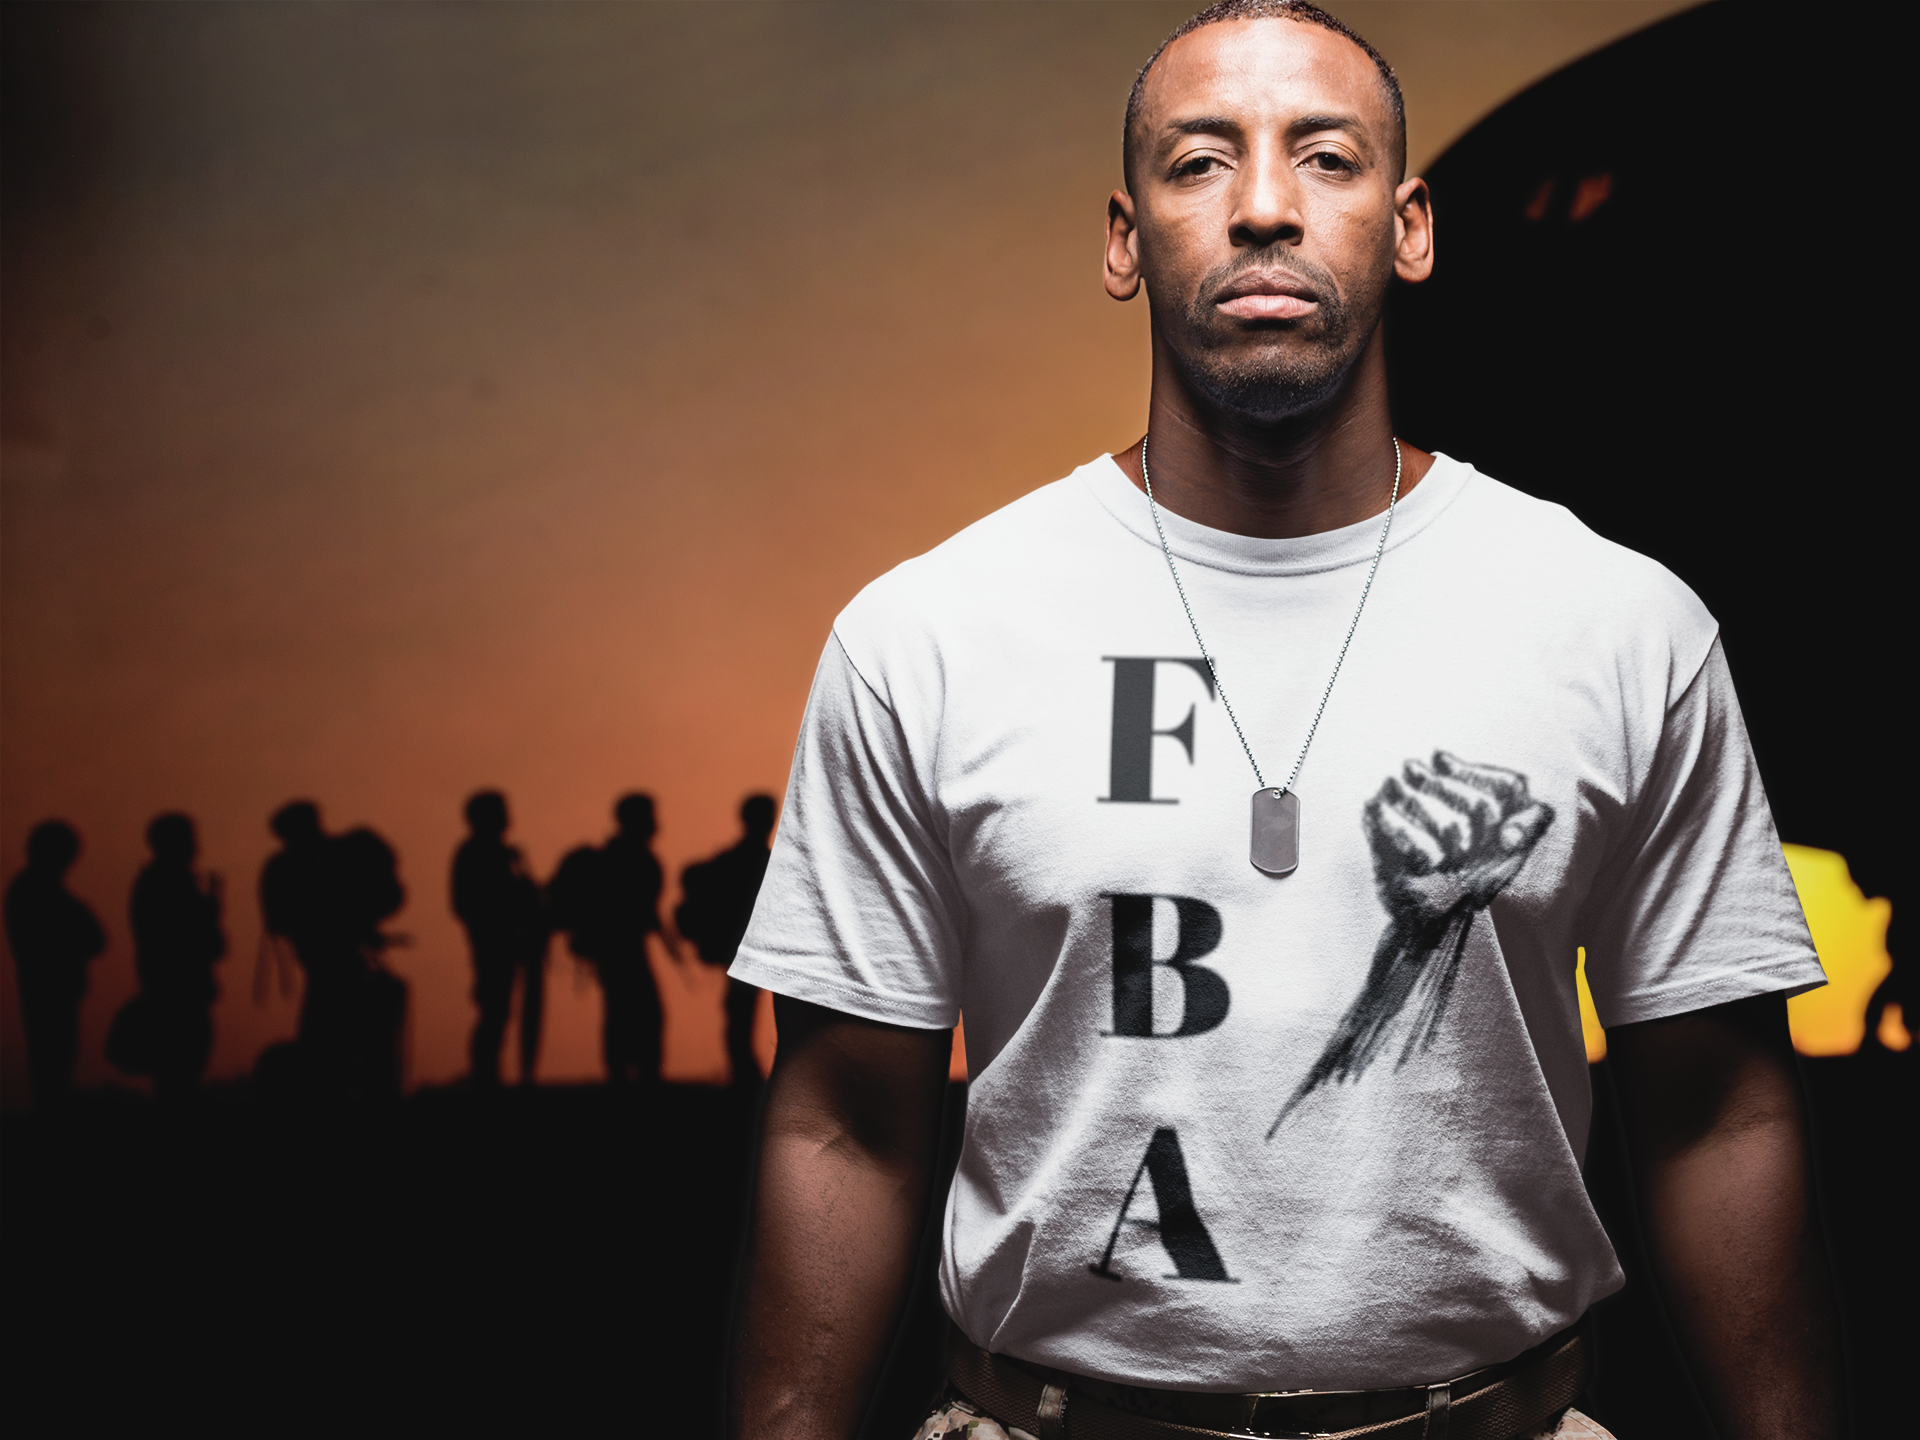 The image showcases a stylish unisex garment-dyed t-shirt in a deep, rich color. The front features a striking FBA graphic, celebrating the legacy of Foundational Black Americans. The soft, comfortable fabric and relaxed fit are also highlighted, making this tee a perfect blend of style and meaning.